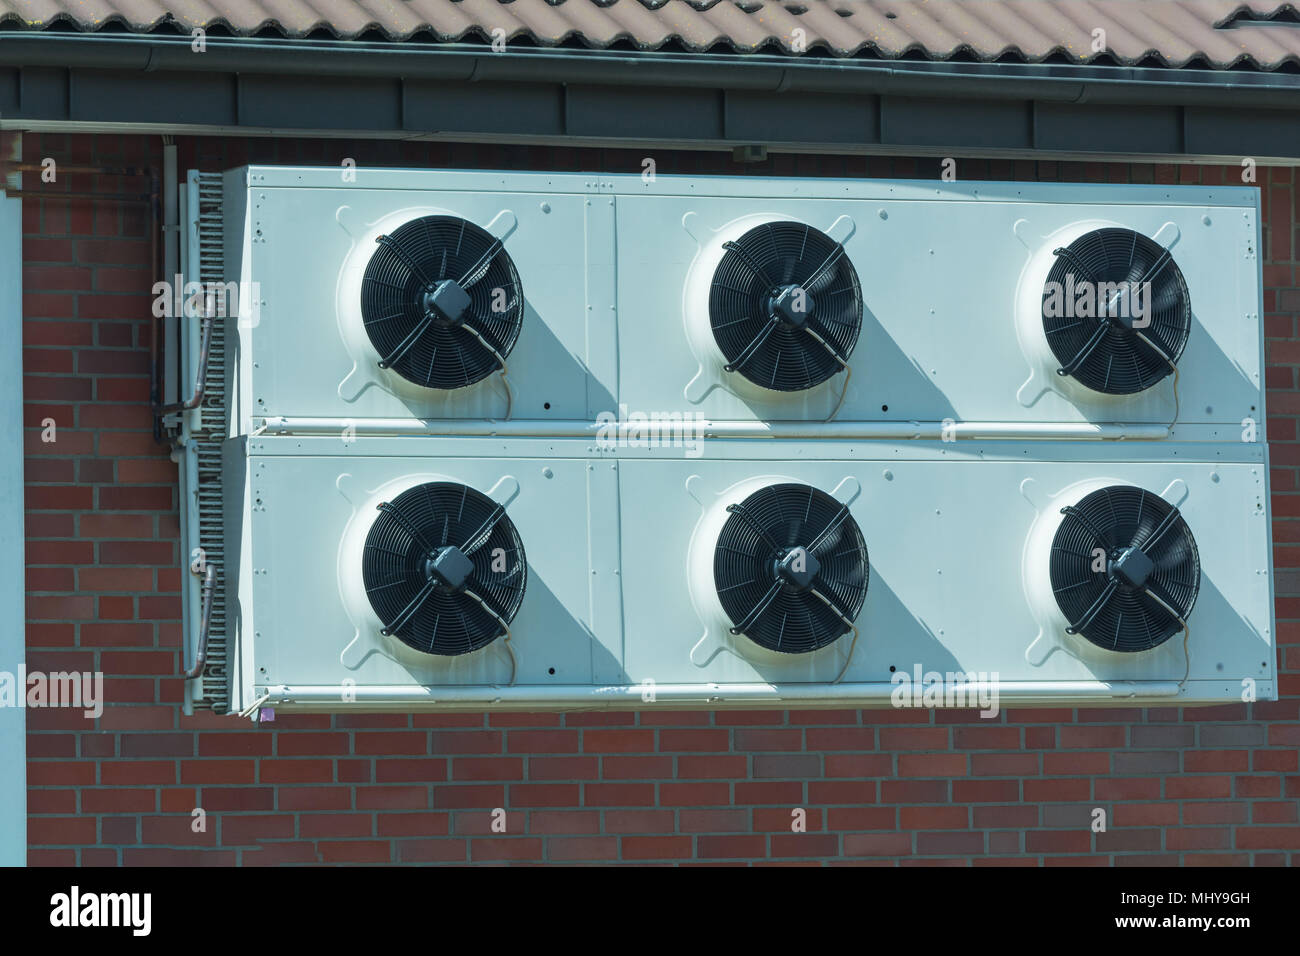 Compressor of an air conditioning mounted on a house wall. Stock Photo